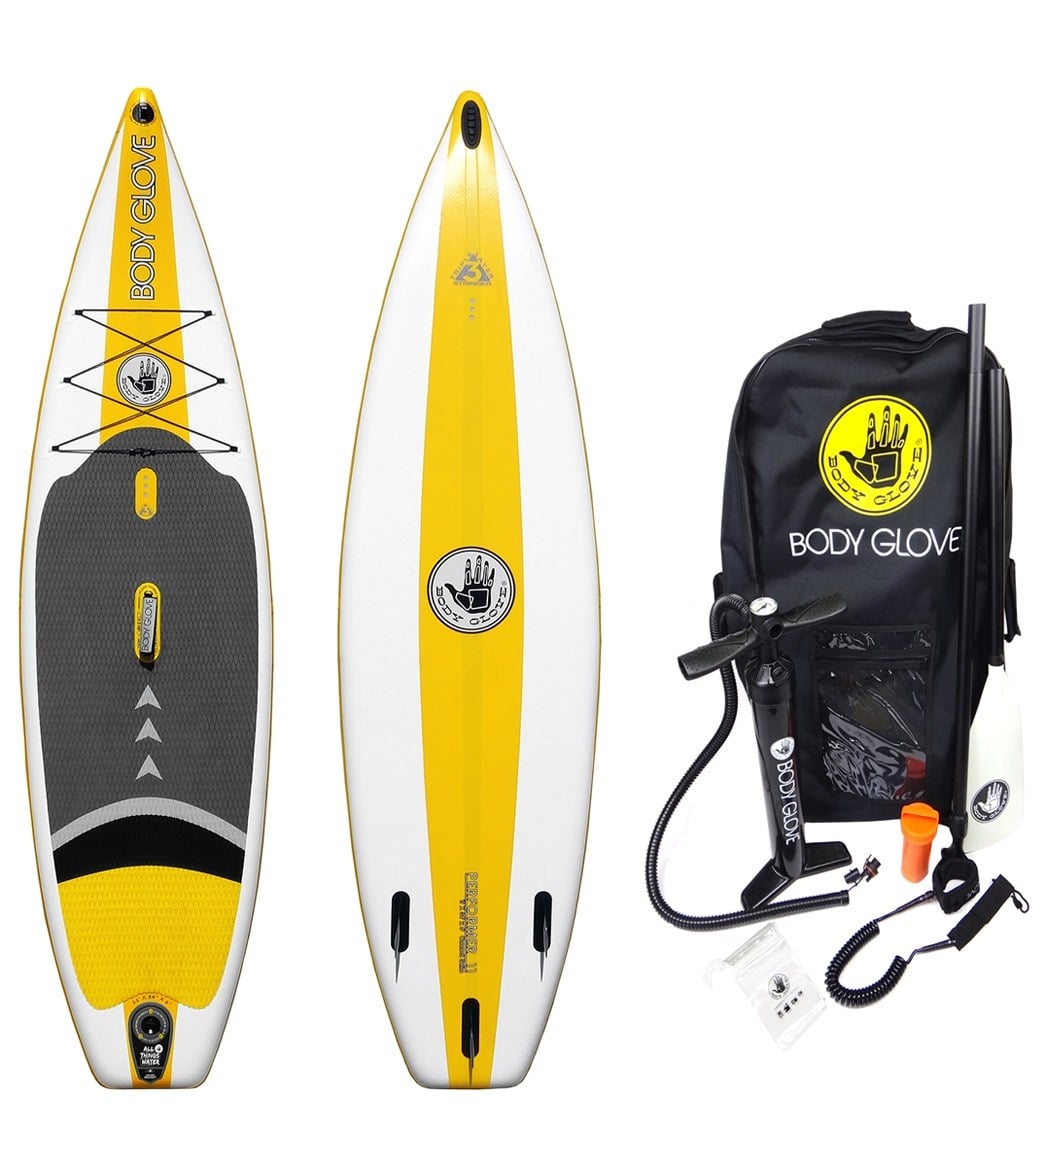 Body Glove Performer 11' SUP Board at Free Shipping